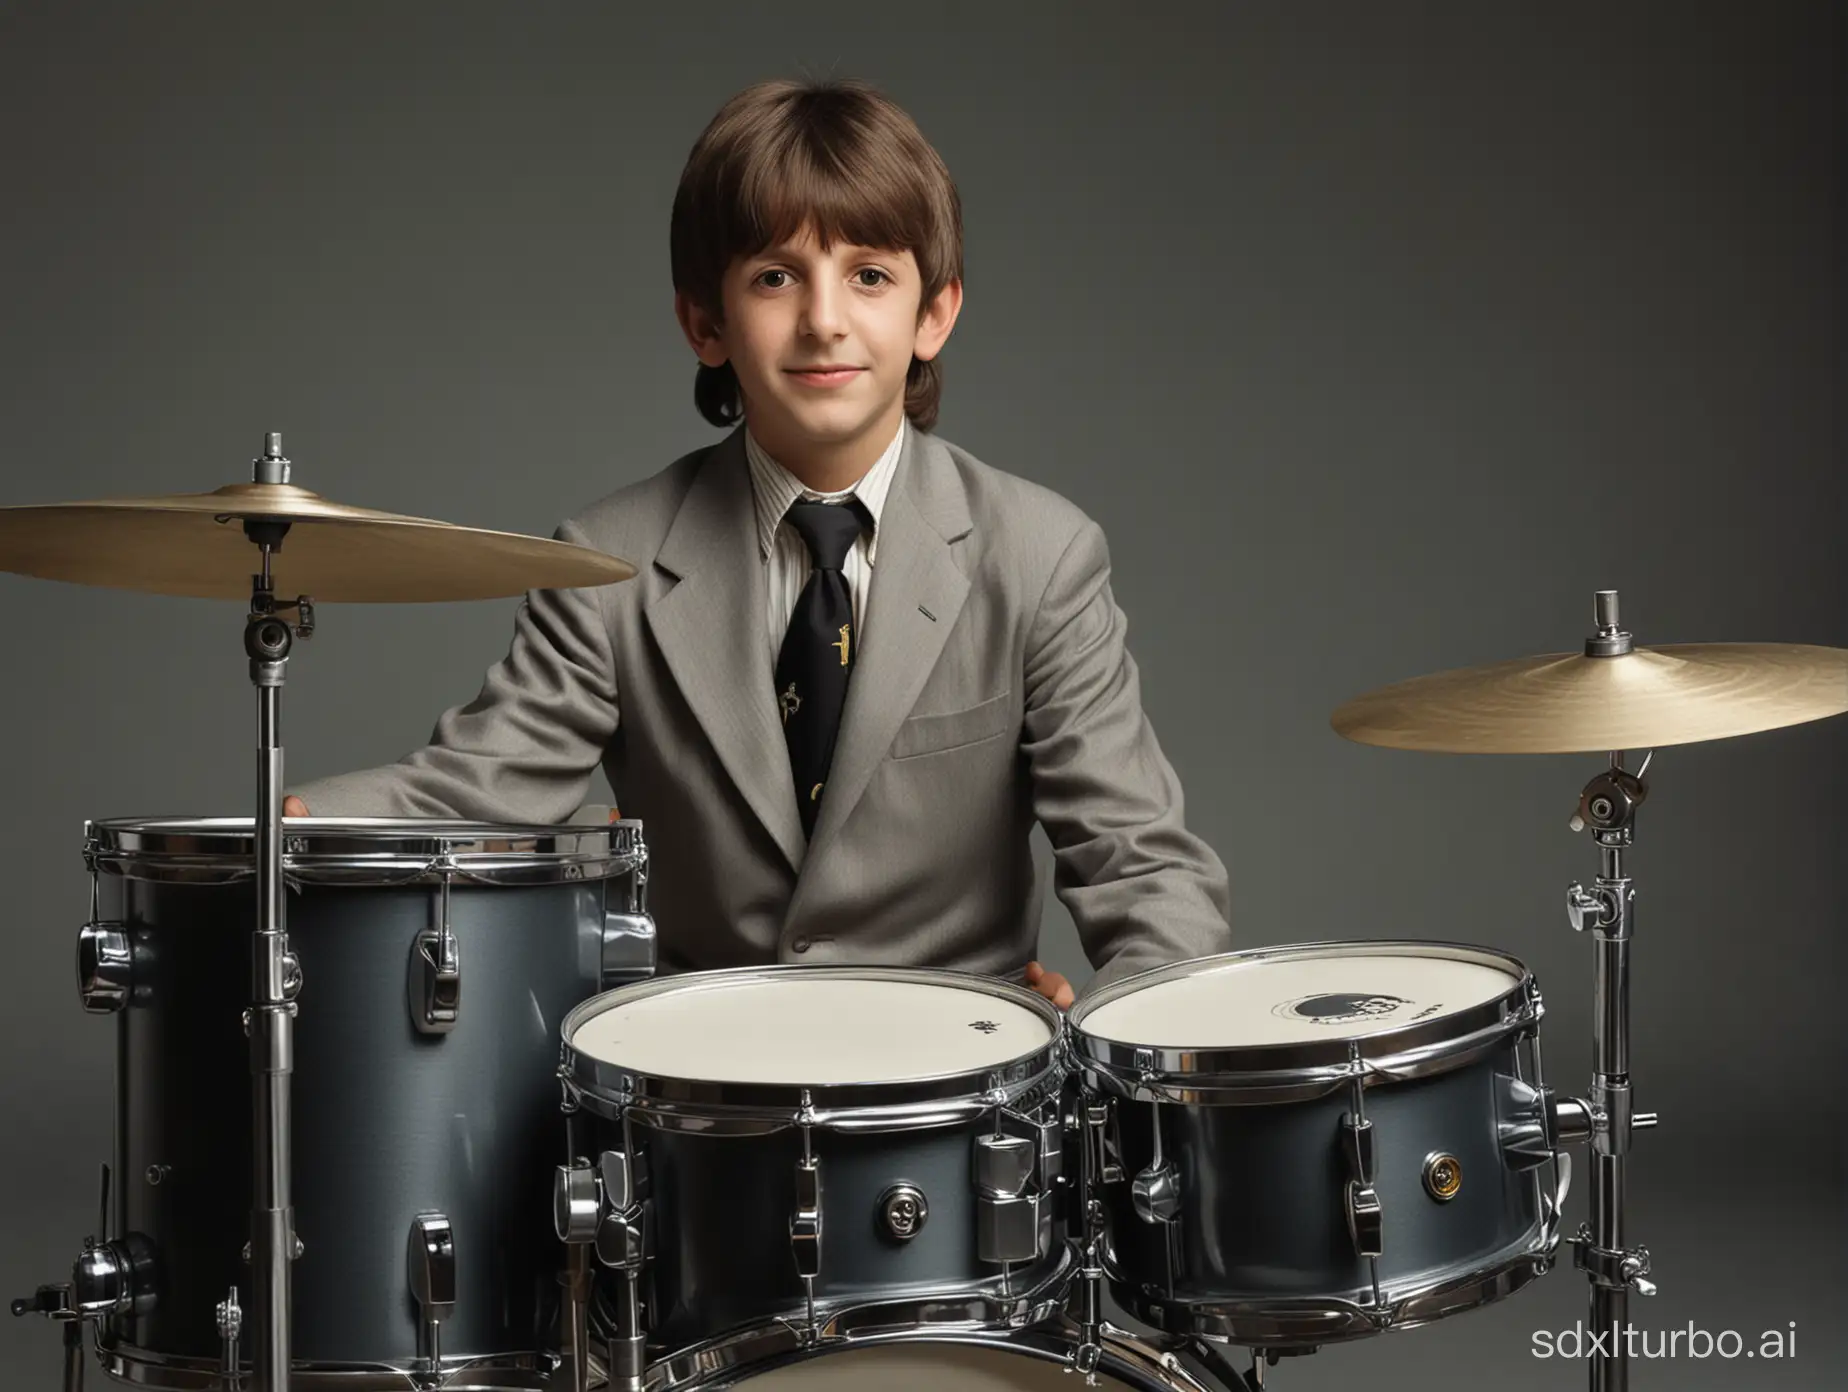 Ringo-Starr-Drummer-Portrait-Realistic-Depiction-of-the-Beatles-Icon-as-an-11YearOld-Child